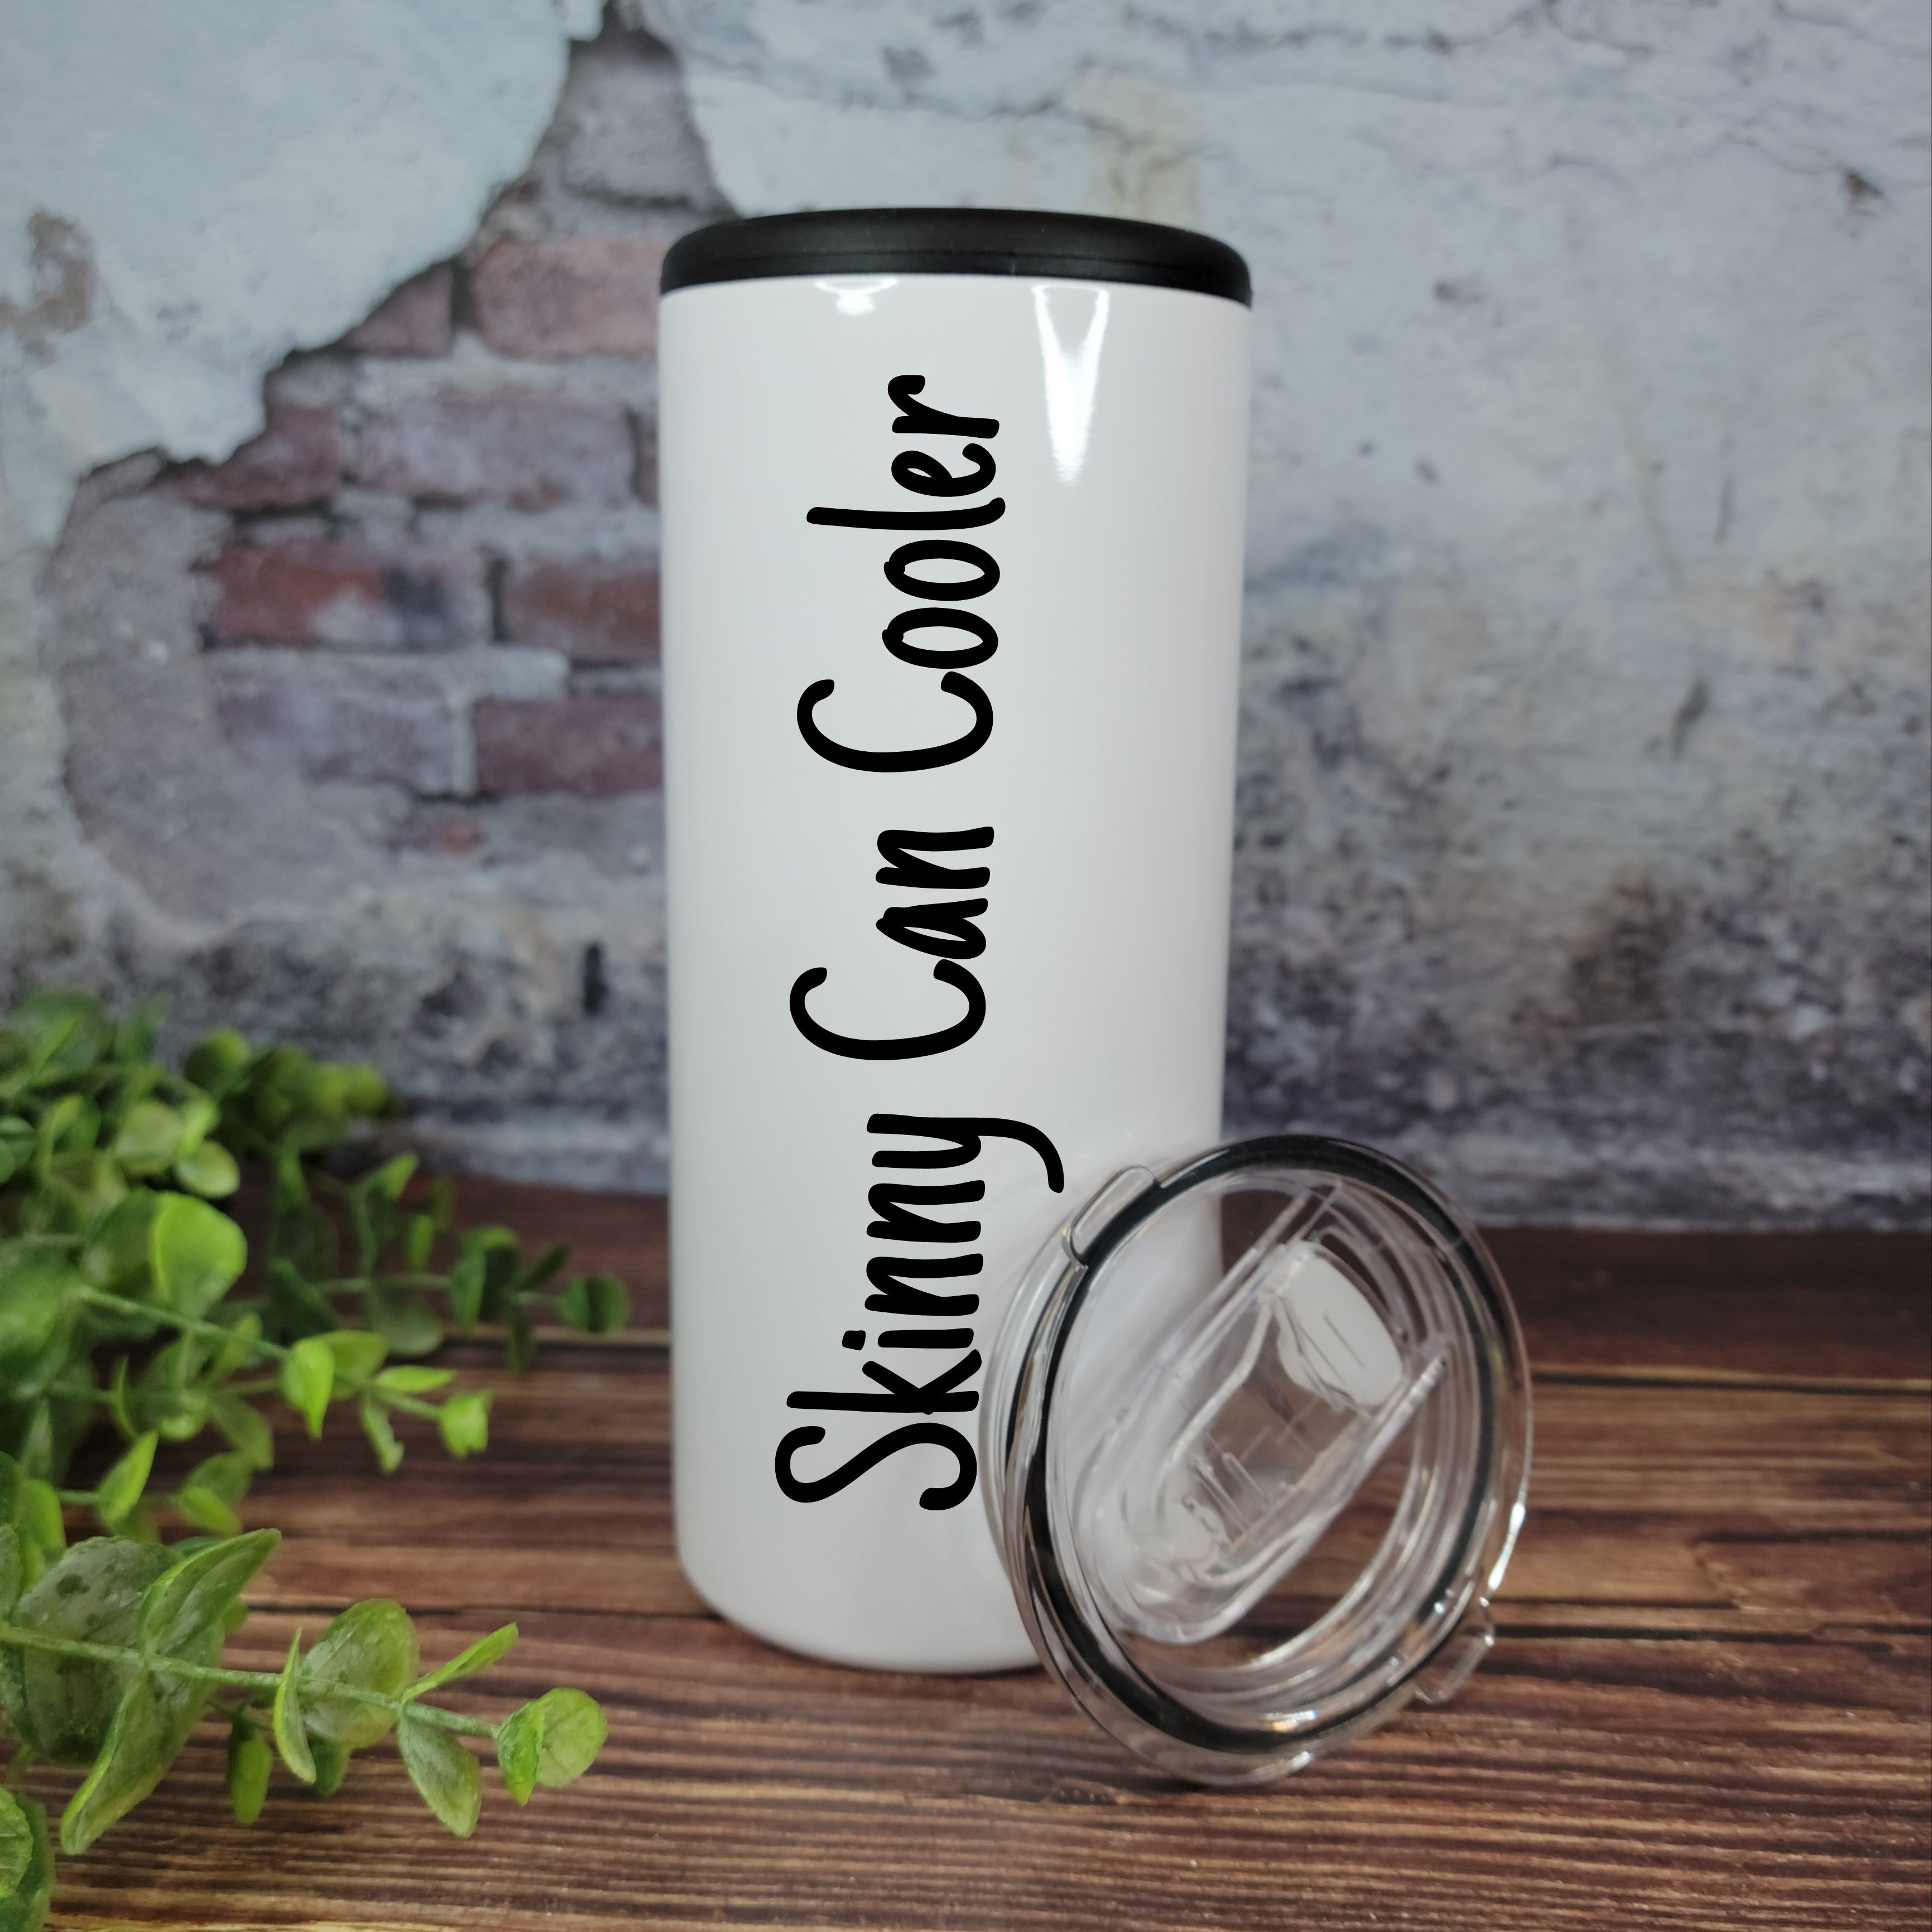 4 in 1 Metal can cooler Sublimation ready blanks RTS, 4 in 1